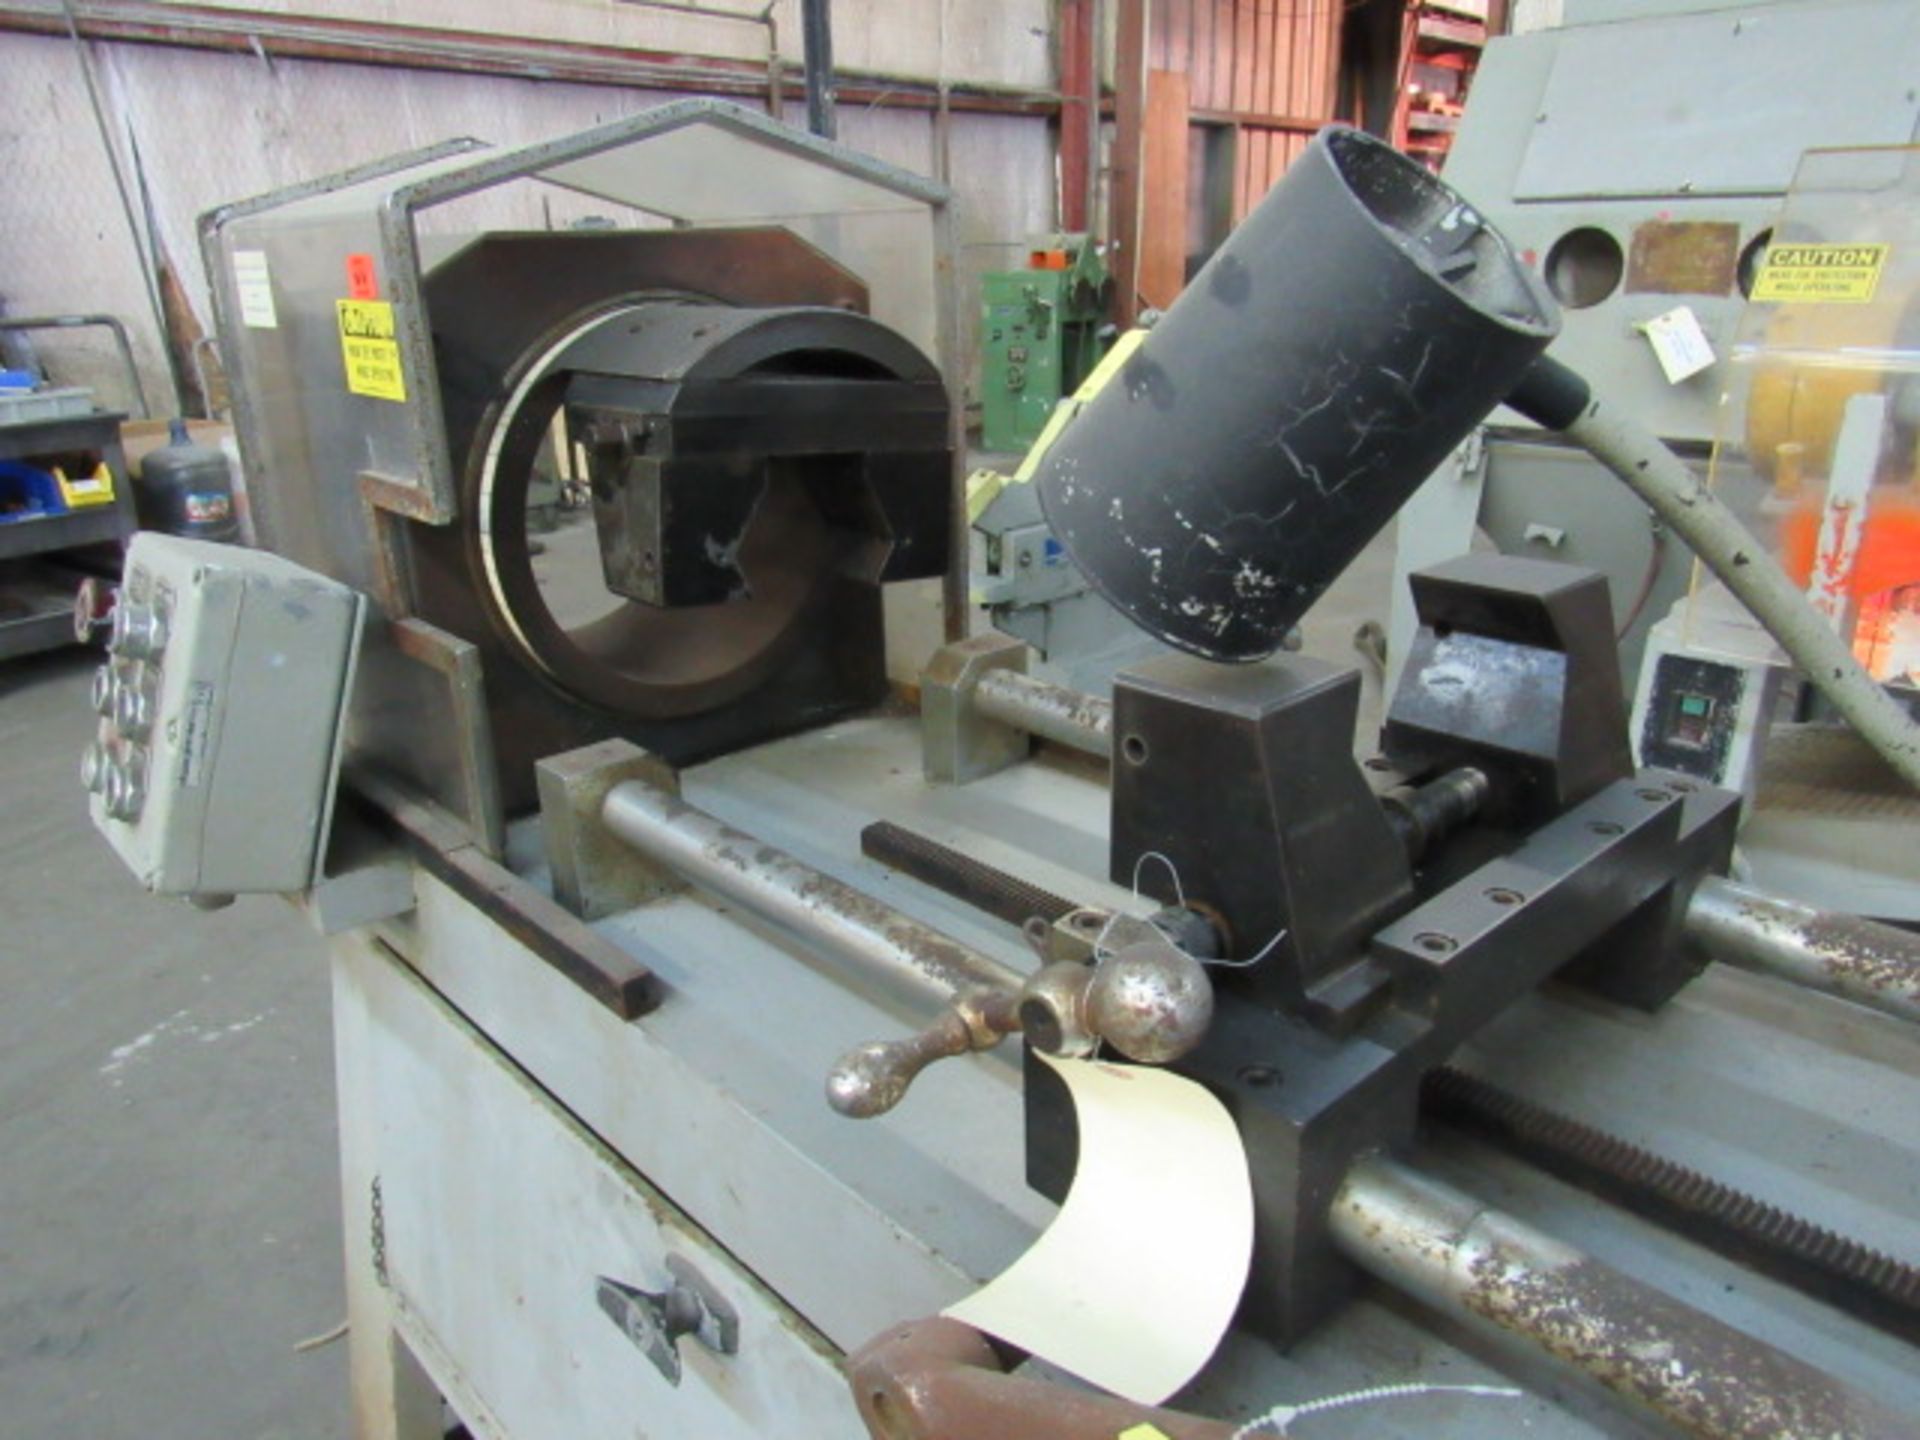 DOG-LEG HOSE ASSEMBLY MACHINE, AEROQUIP MDL. A, new 1985, 4” to 48” cap., large qty. of tooling & - Image 2 of 8